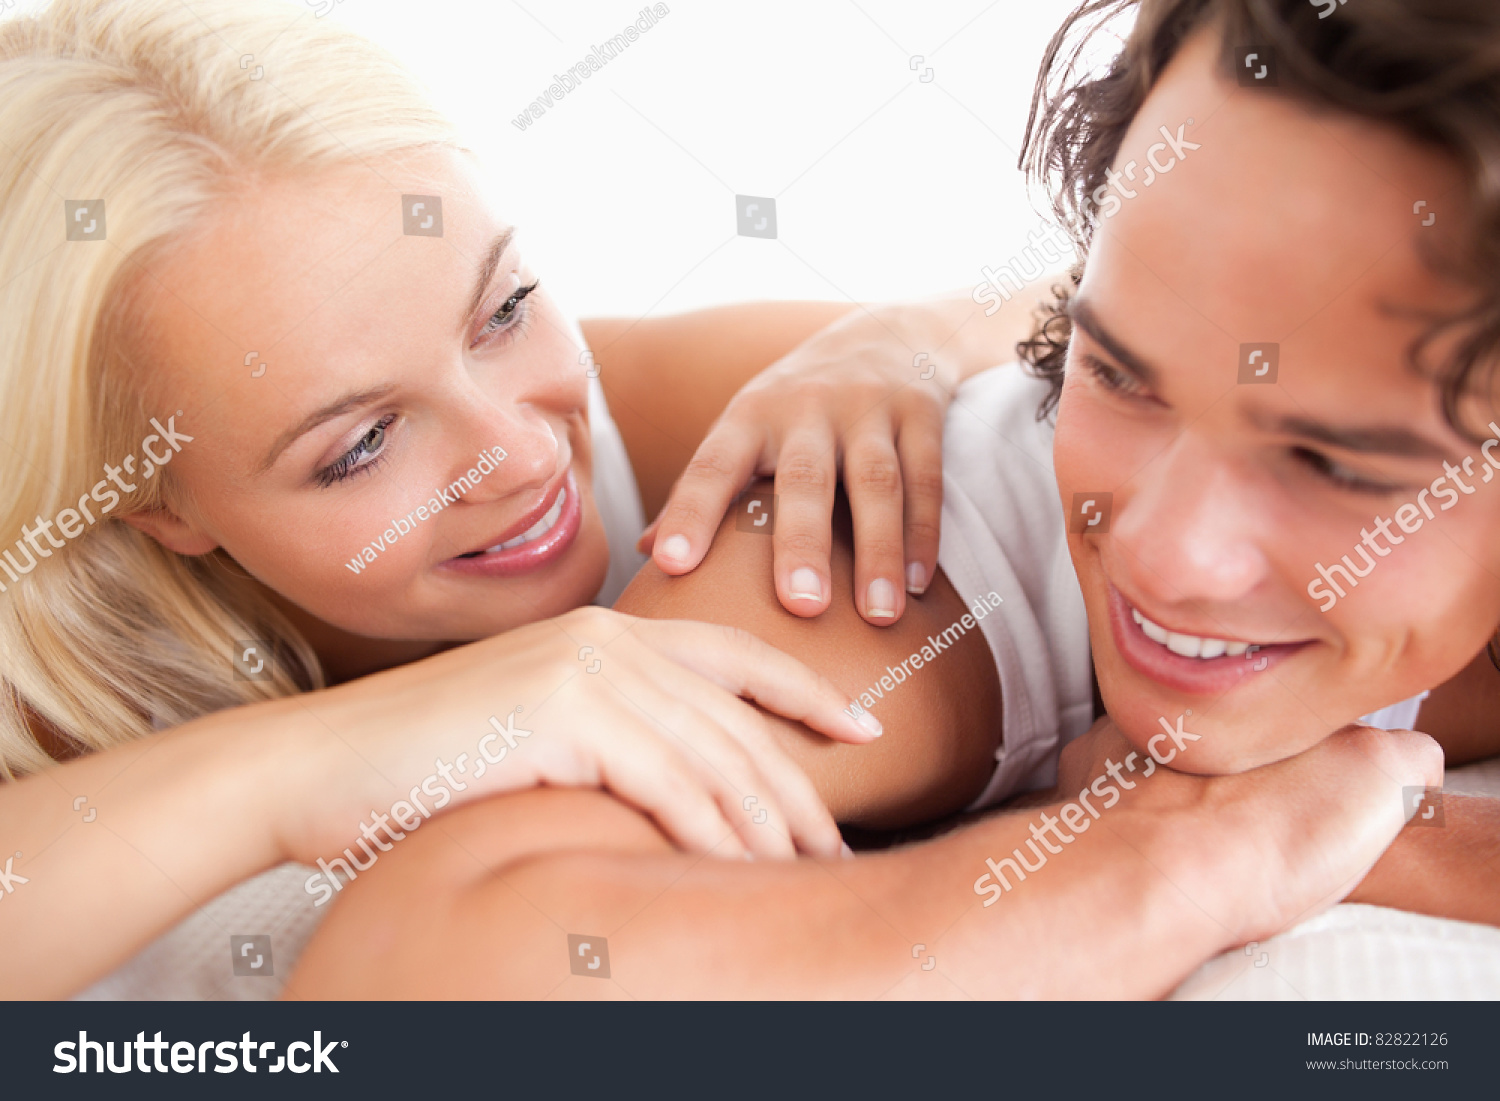 Laughing couple lying while looking at each other #82822126